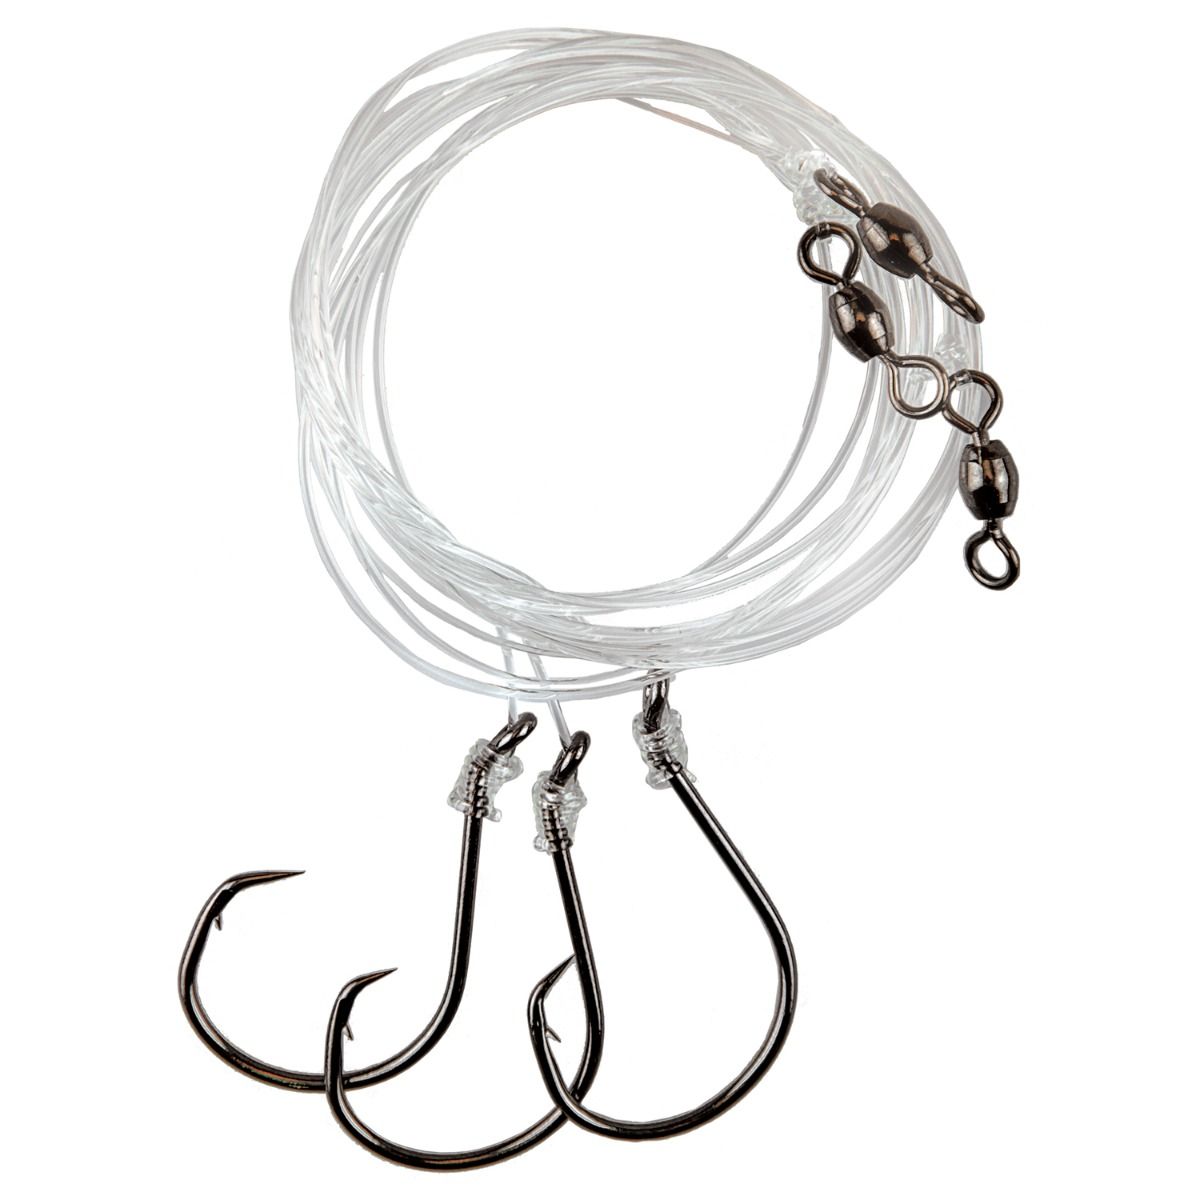 Eagle Claw - Striped Bass Rigs with In-Line Circle Hooks